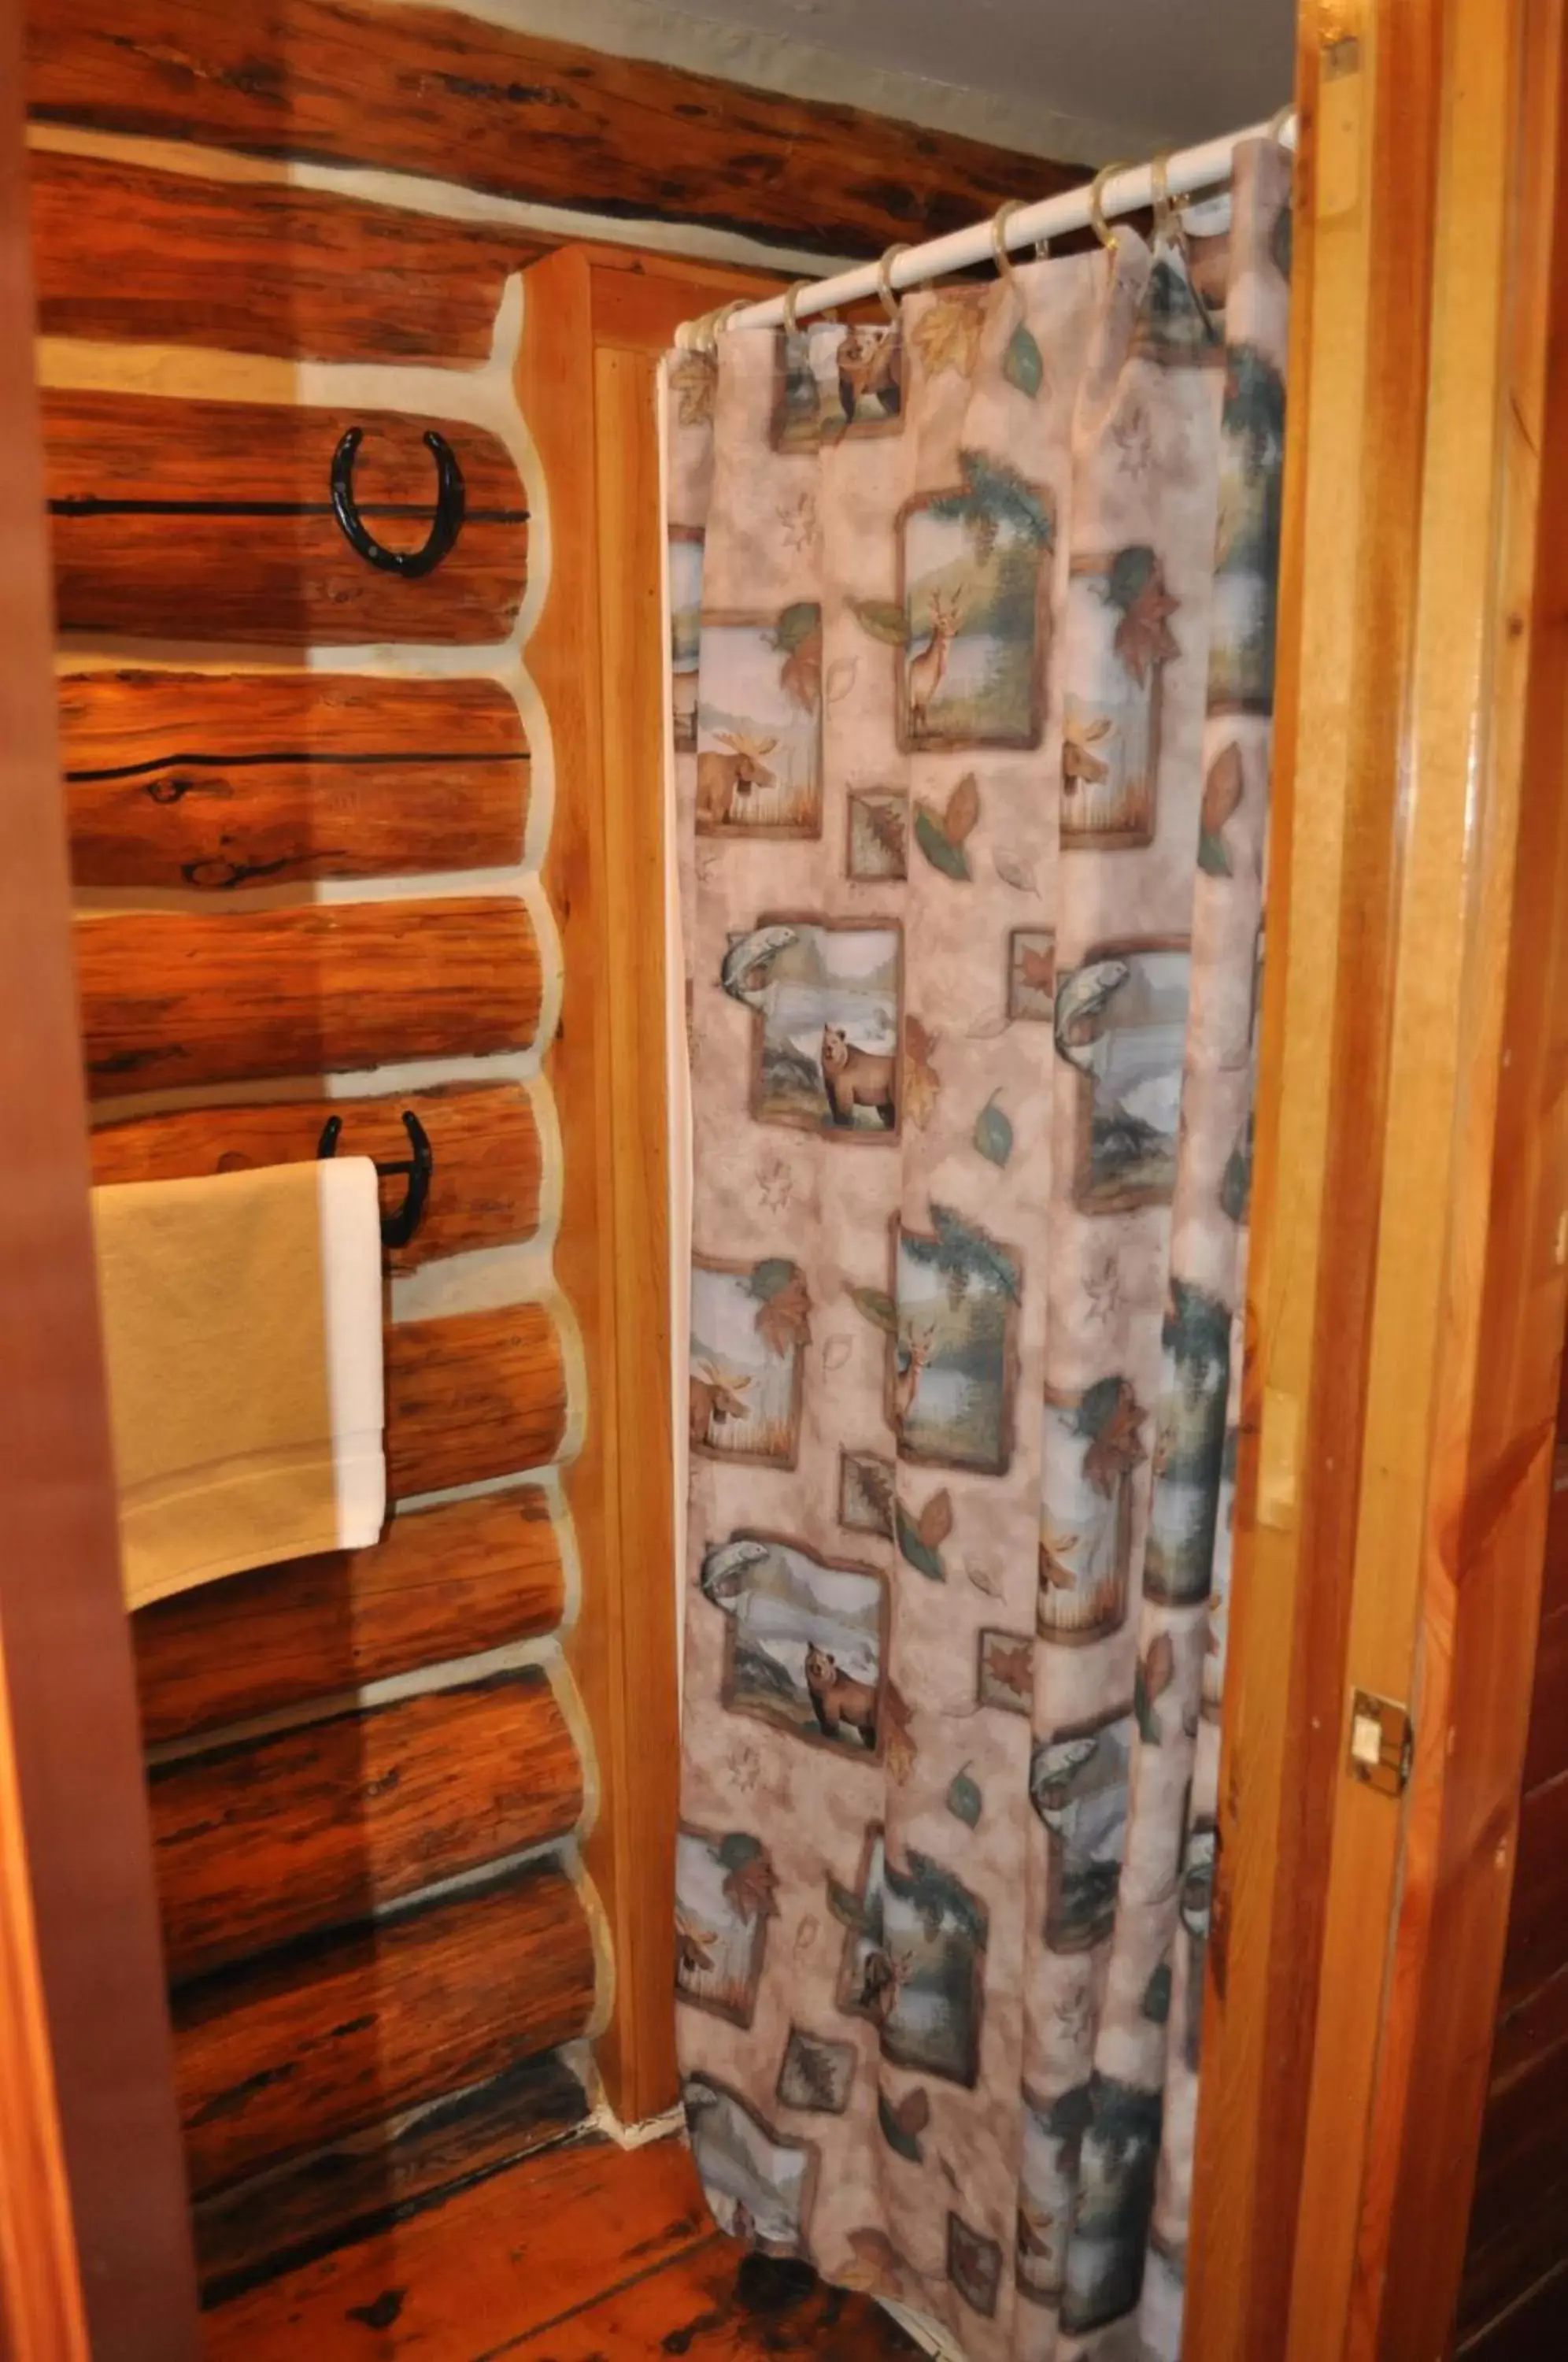 Shower, Bathroom in Crooked Creek Guest Ranch